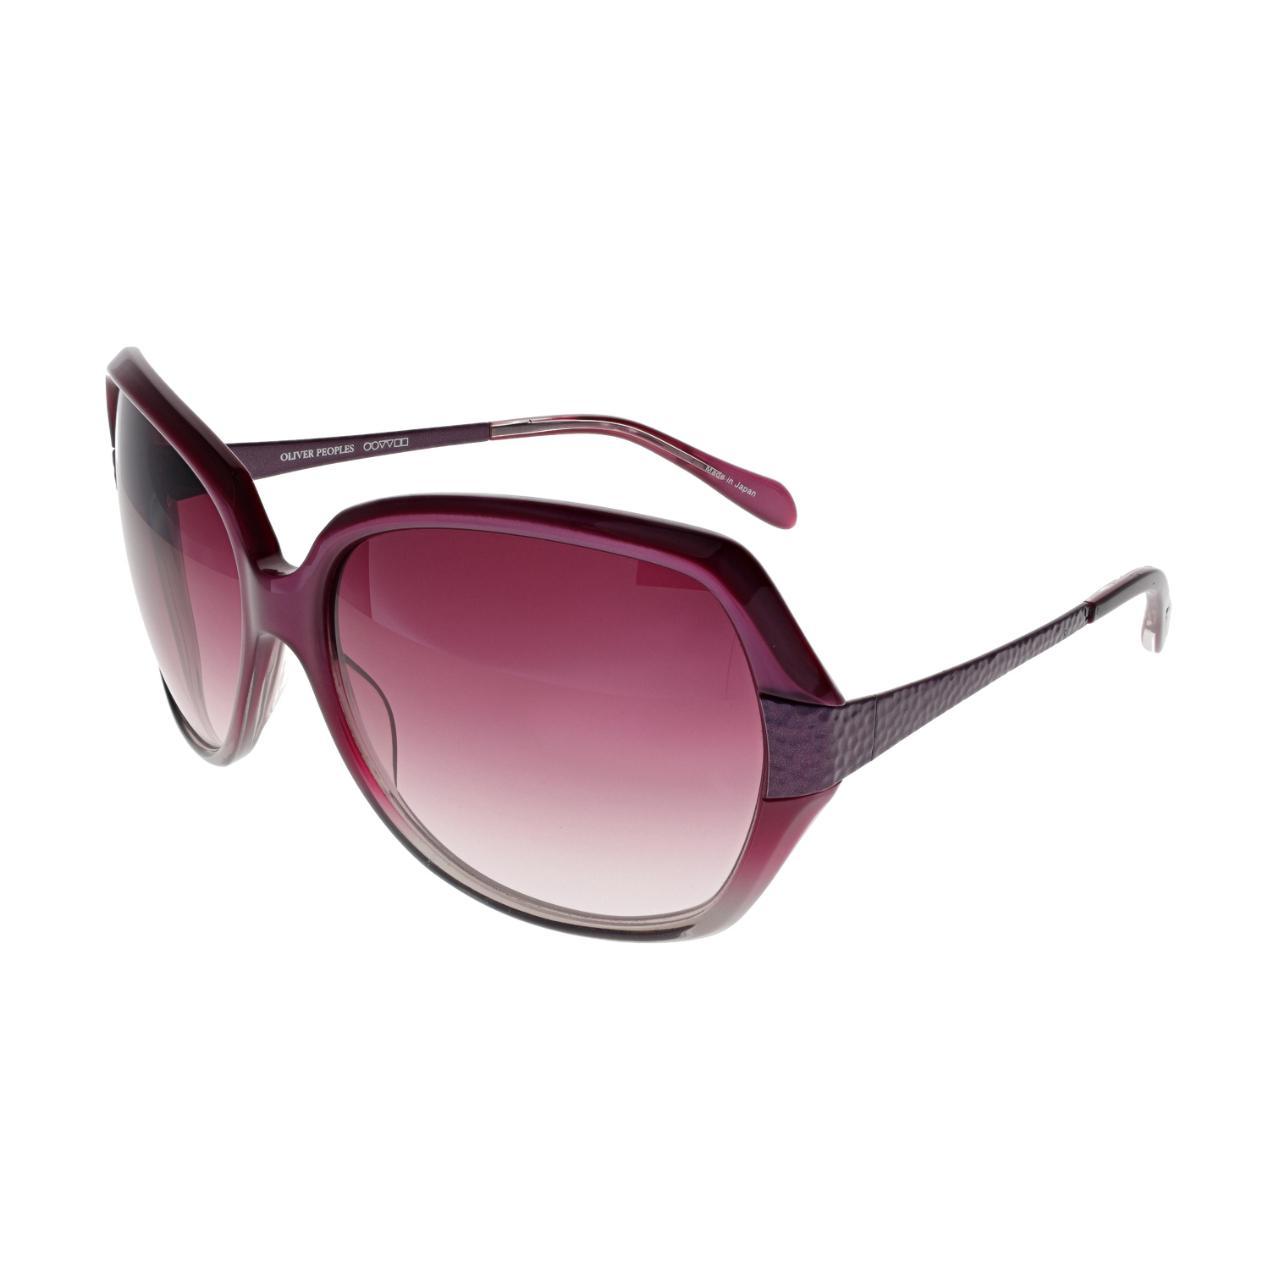 Oliver Peoples Women's Burgundy and Purple Sunglasses